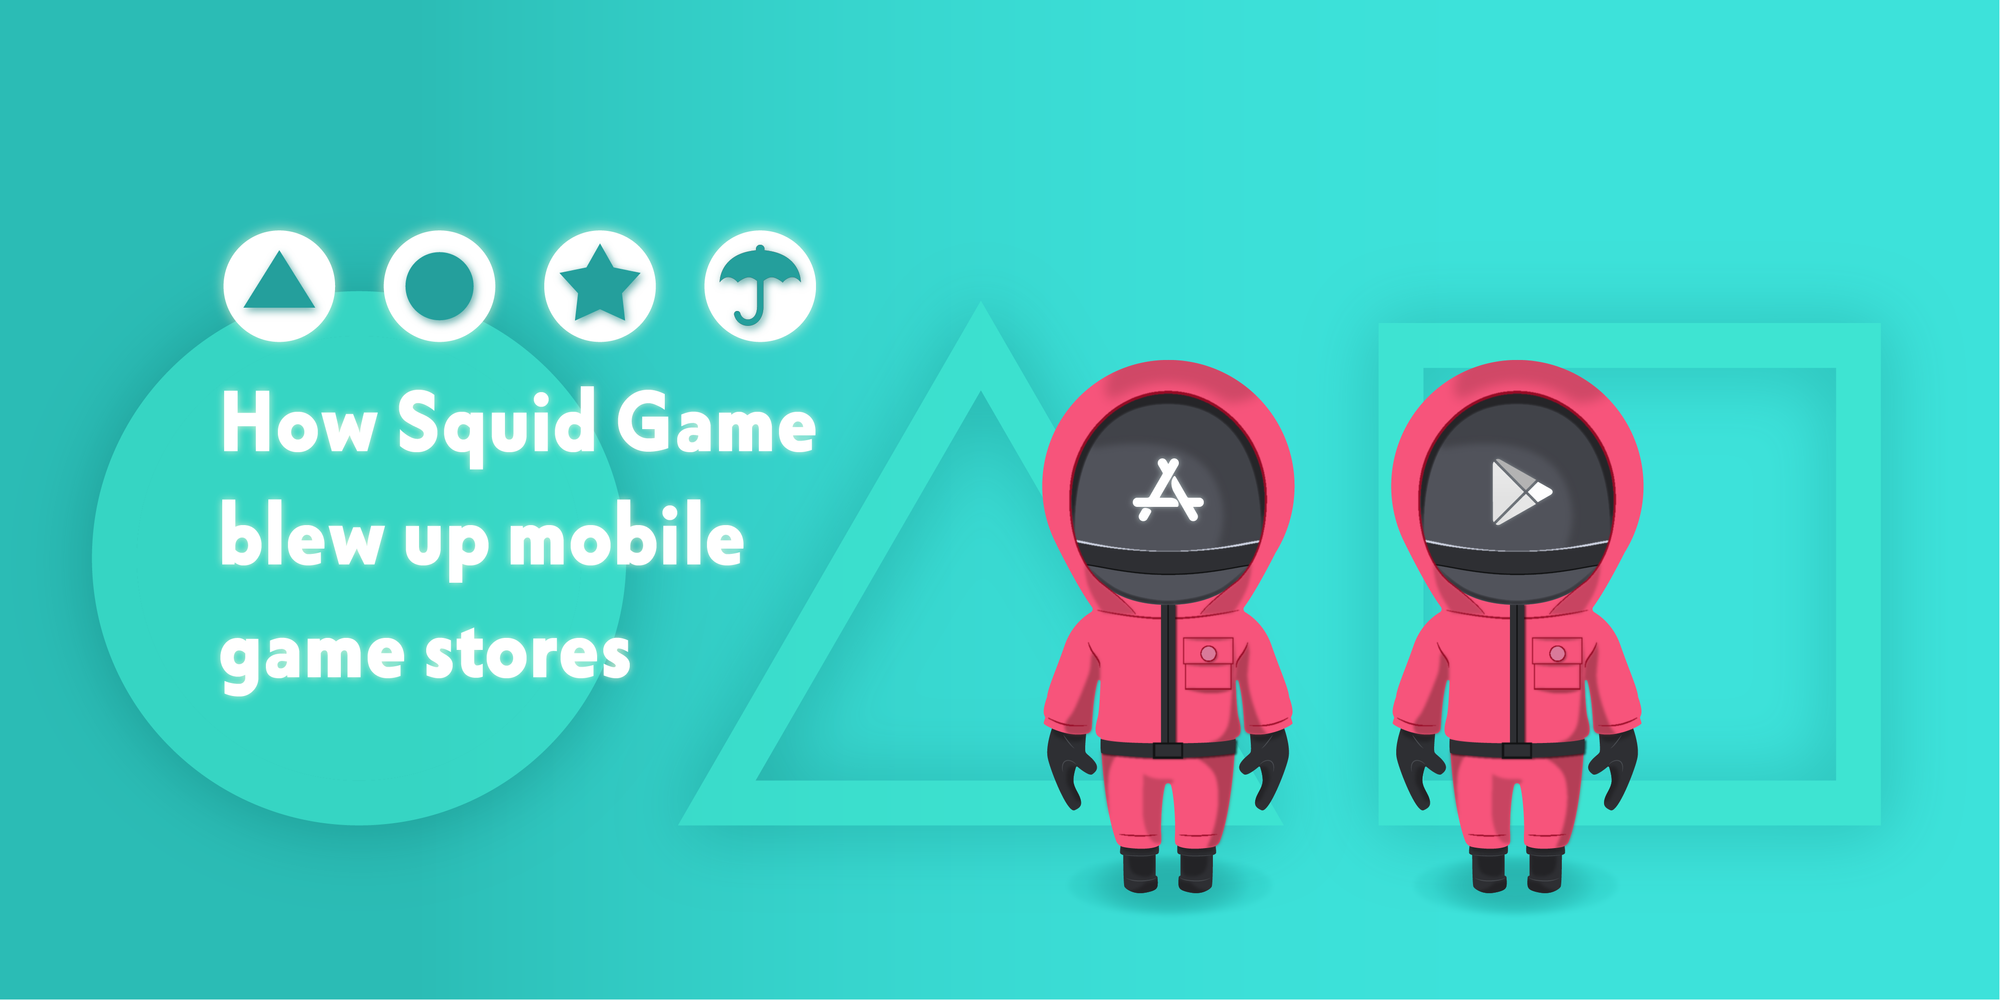 How Squid Game blew up mobile game stores: the numbers, plots and leaders